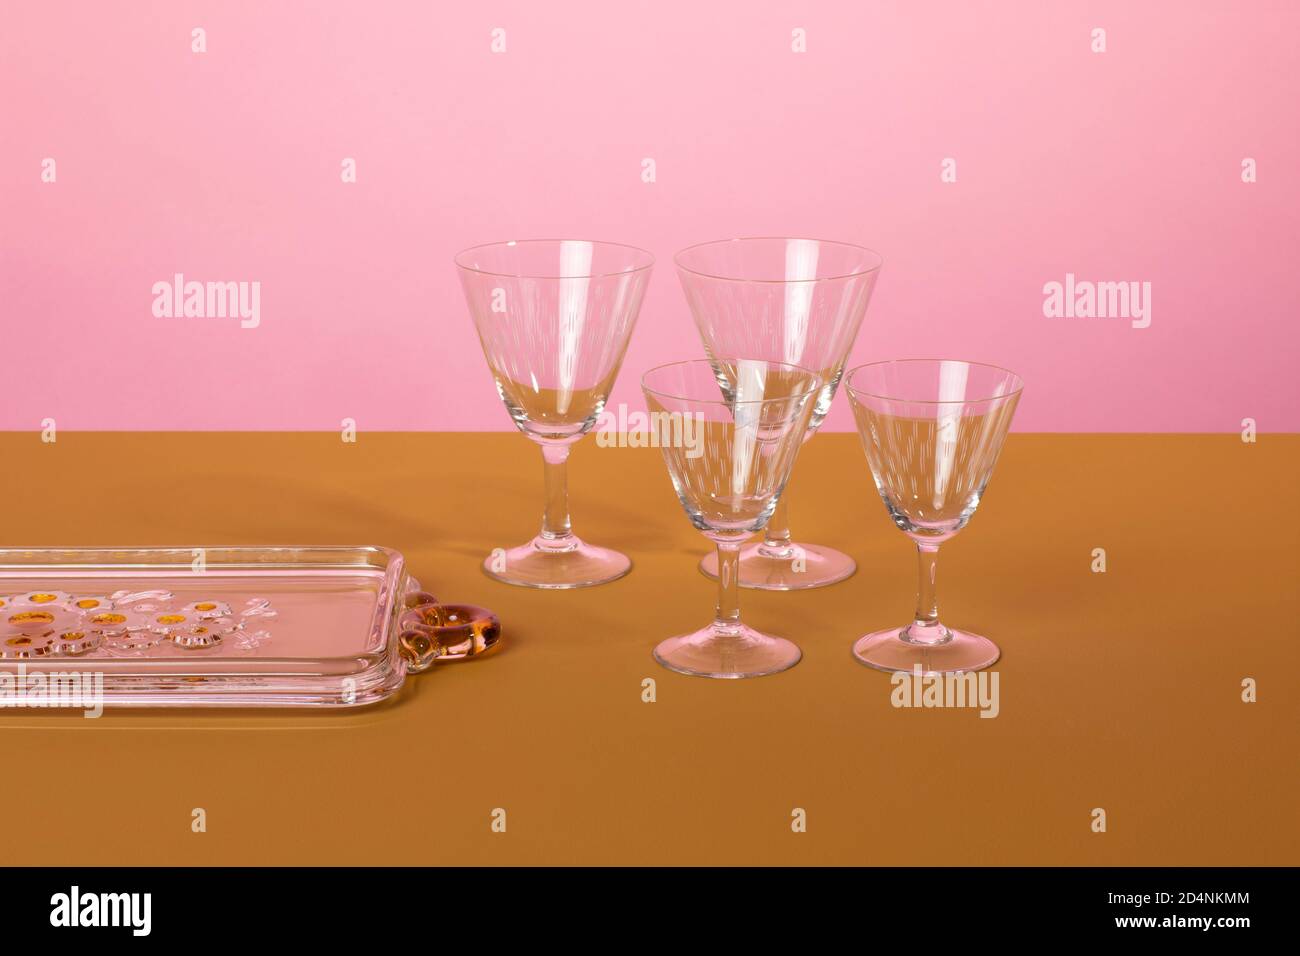 Set of classsic martini cocktail glasses standing next to a glass serving plate on a brown surface and a pink background. Clean minimalistic elegant s Stock Photo